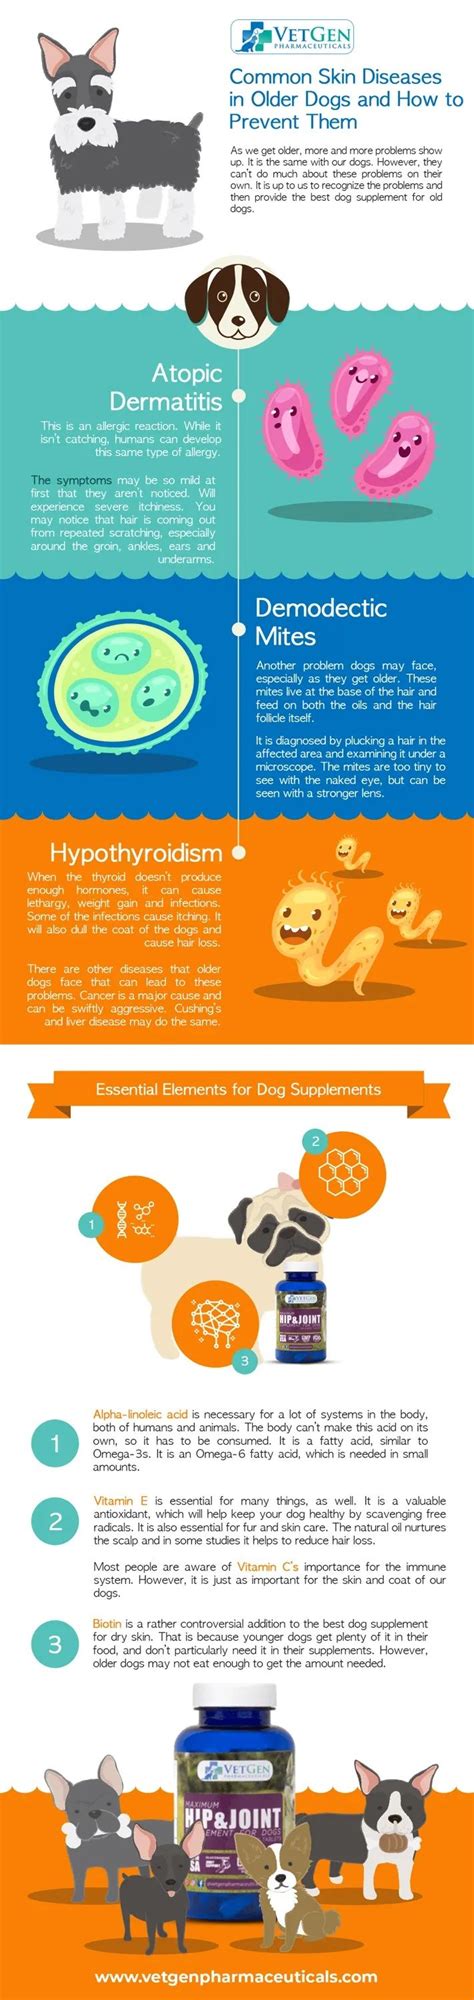 Common Skin Diseases Old Dogs Infographic Dog Infographic Skin